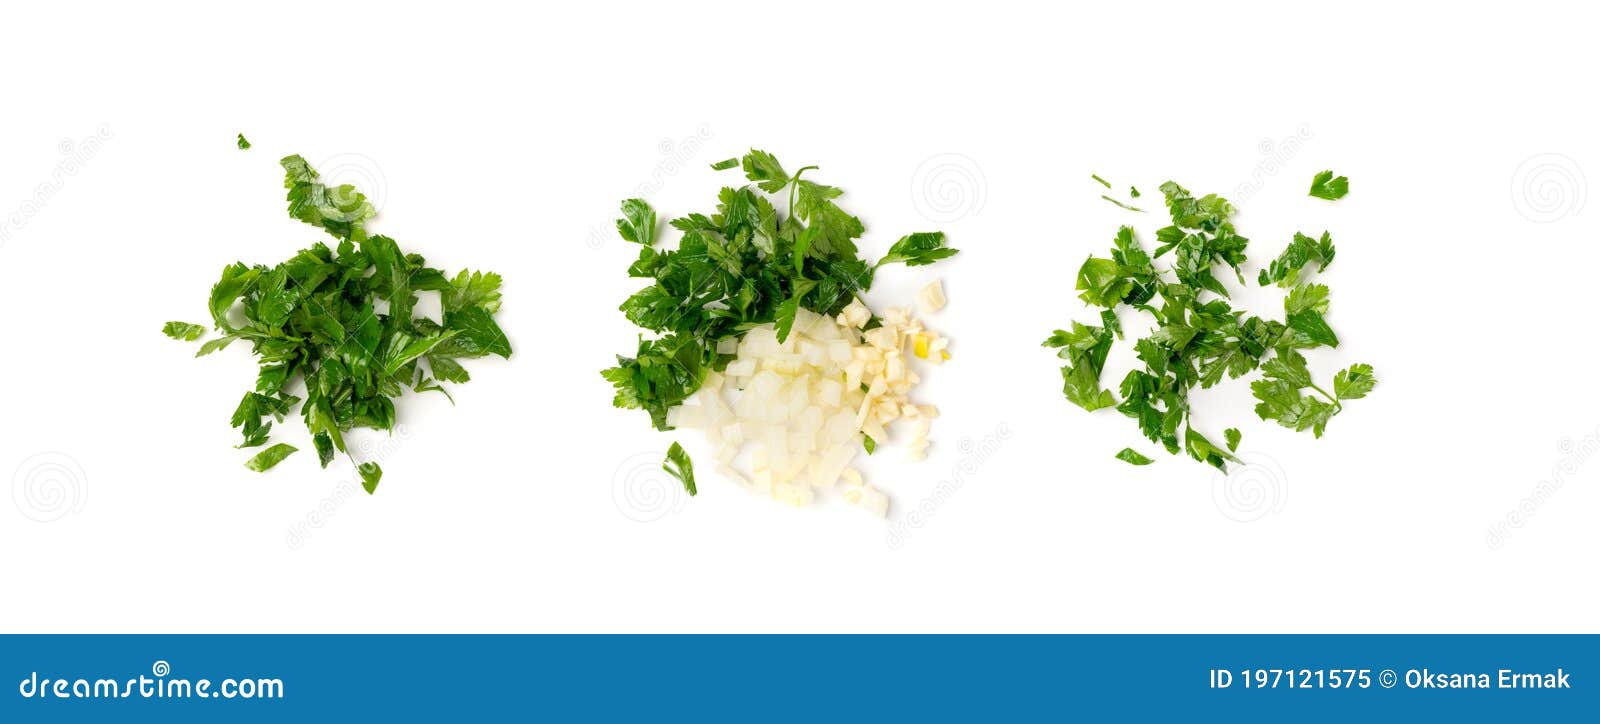 Chopping Parsley As a Garnish Stock Image - Image of stainless, leaves:  29712743